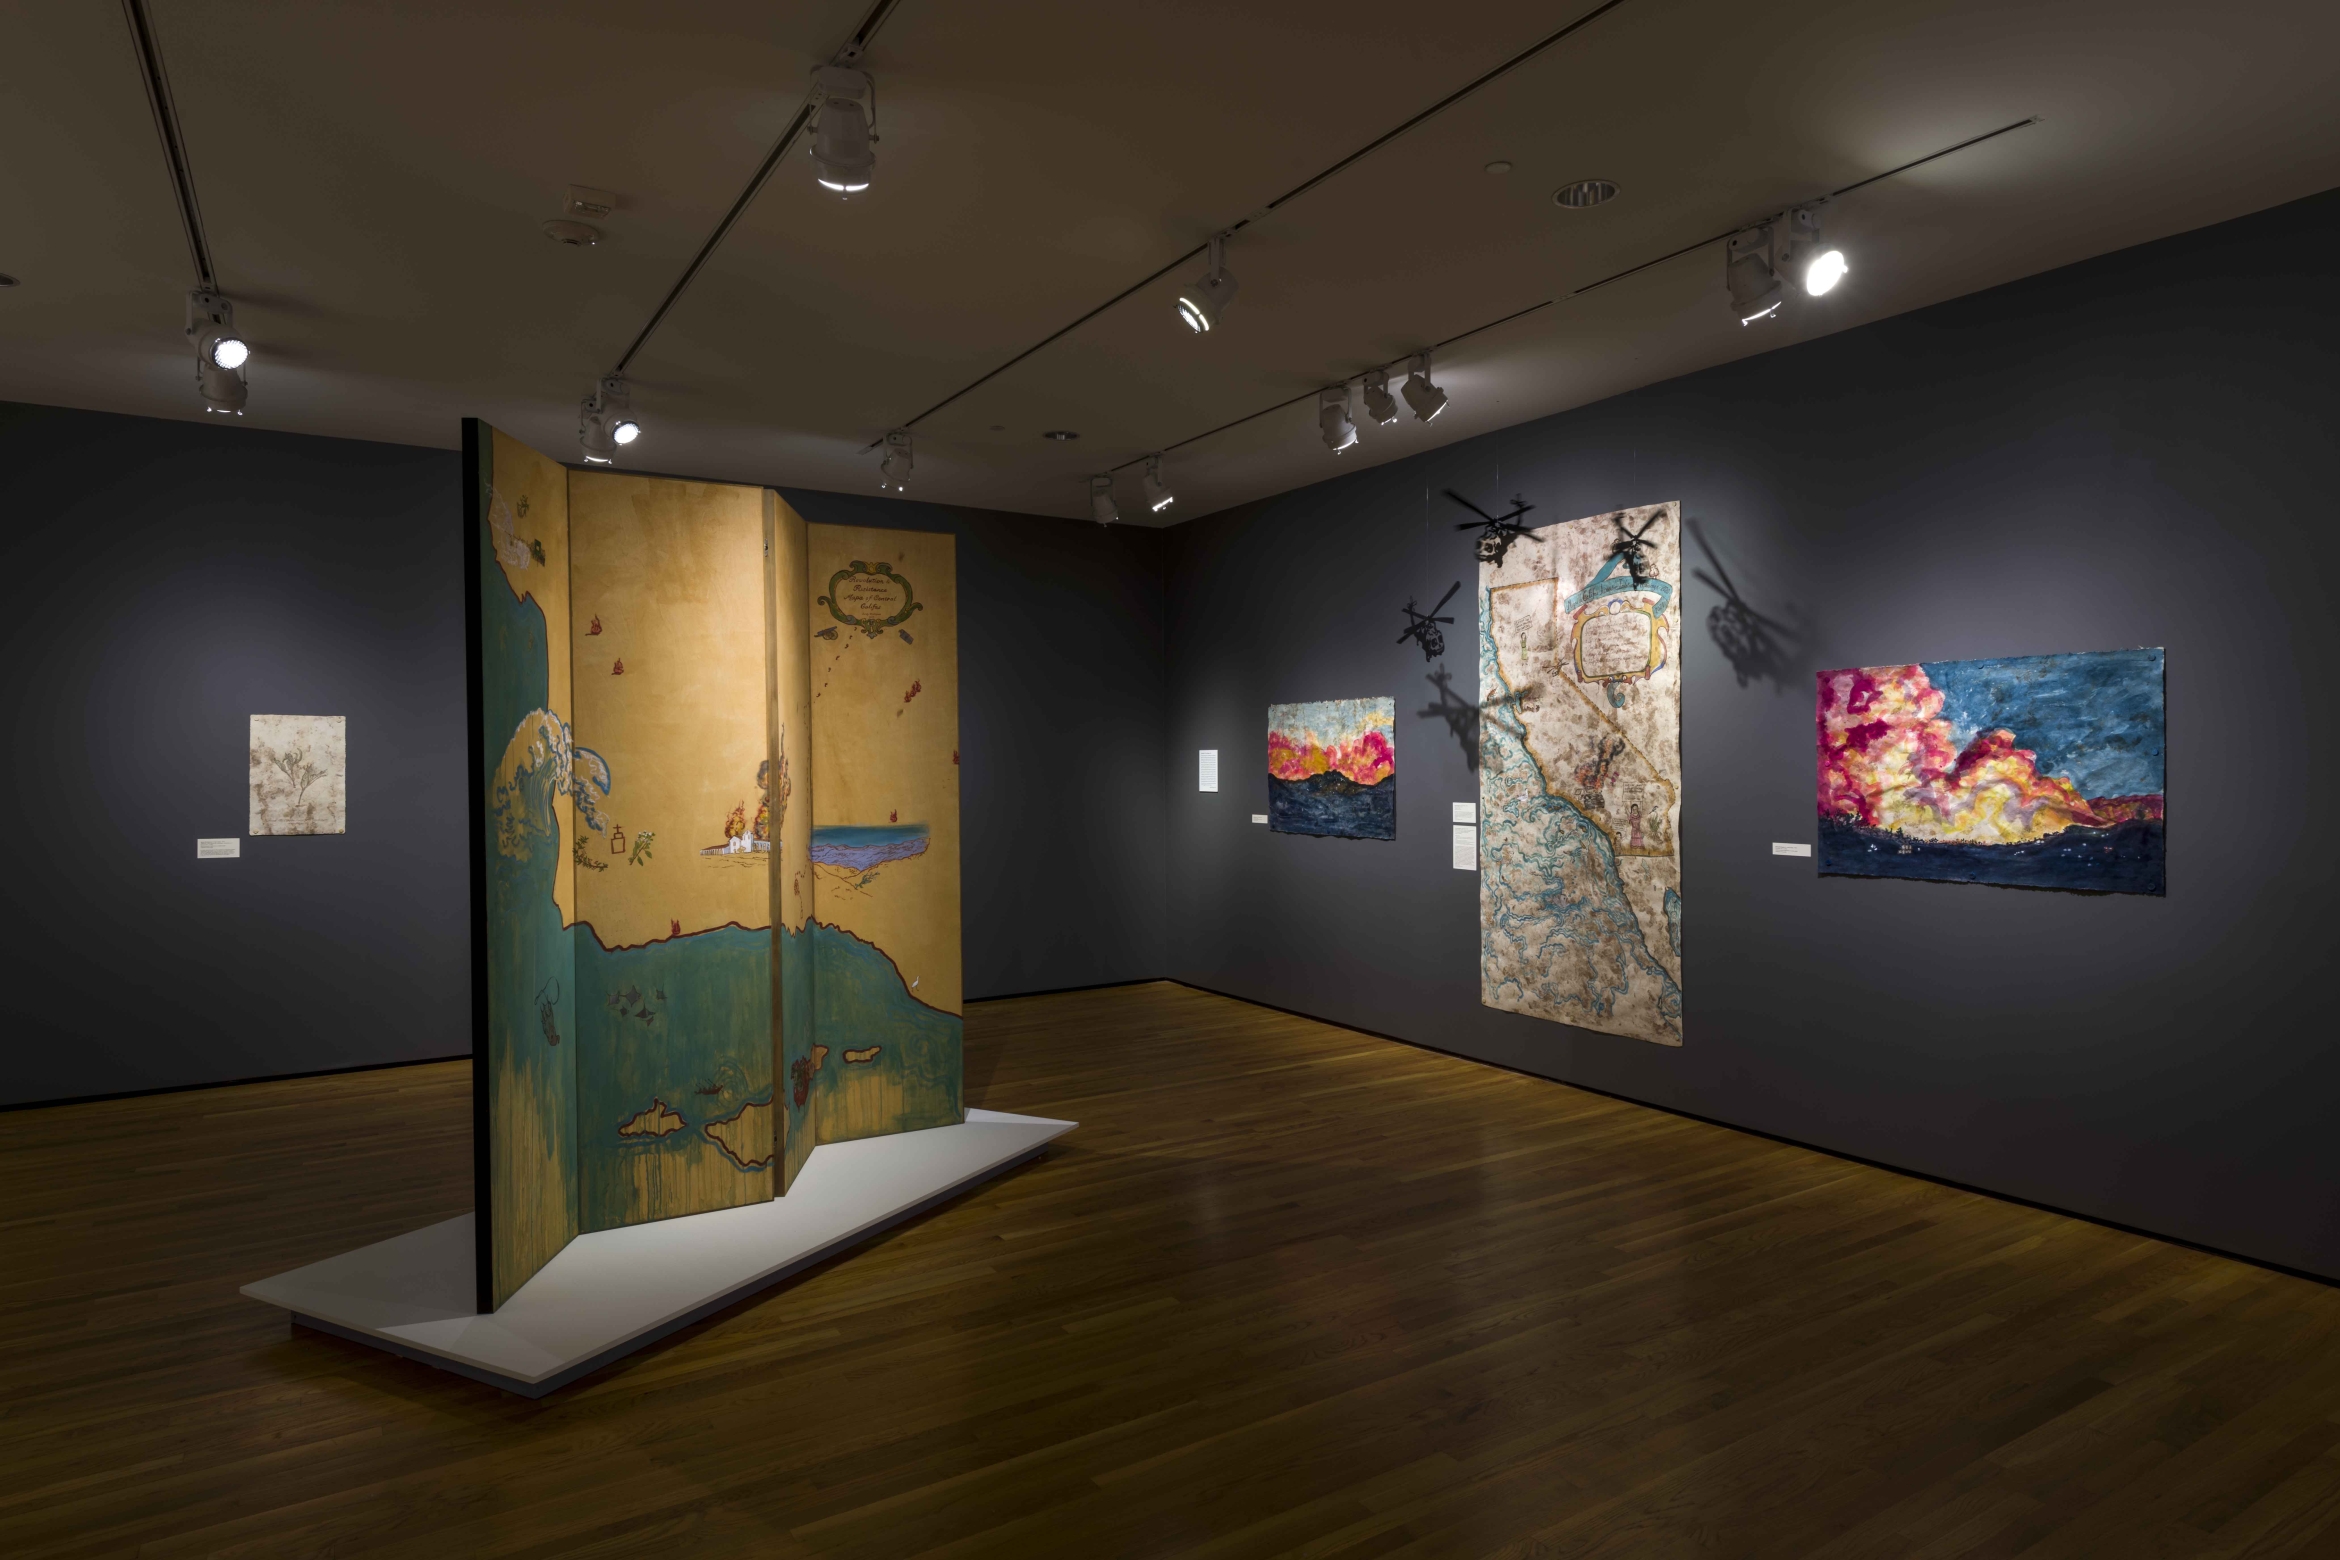 Installation views of Sandy Rodriguez — Unfolding Histories: 200 Years of Resistance